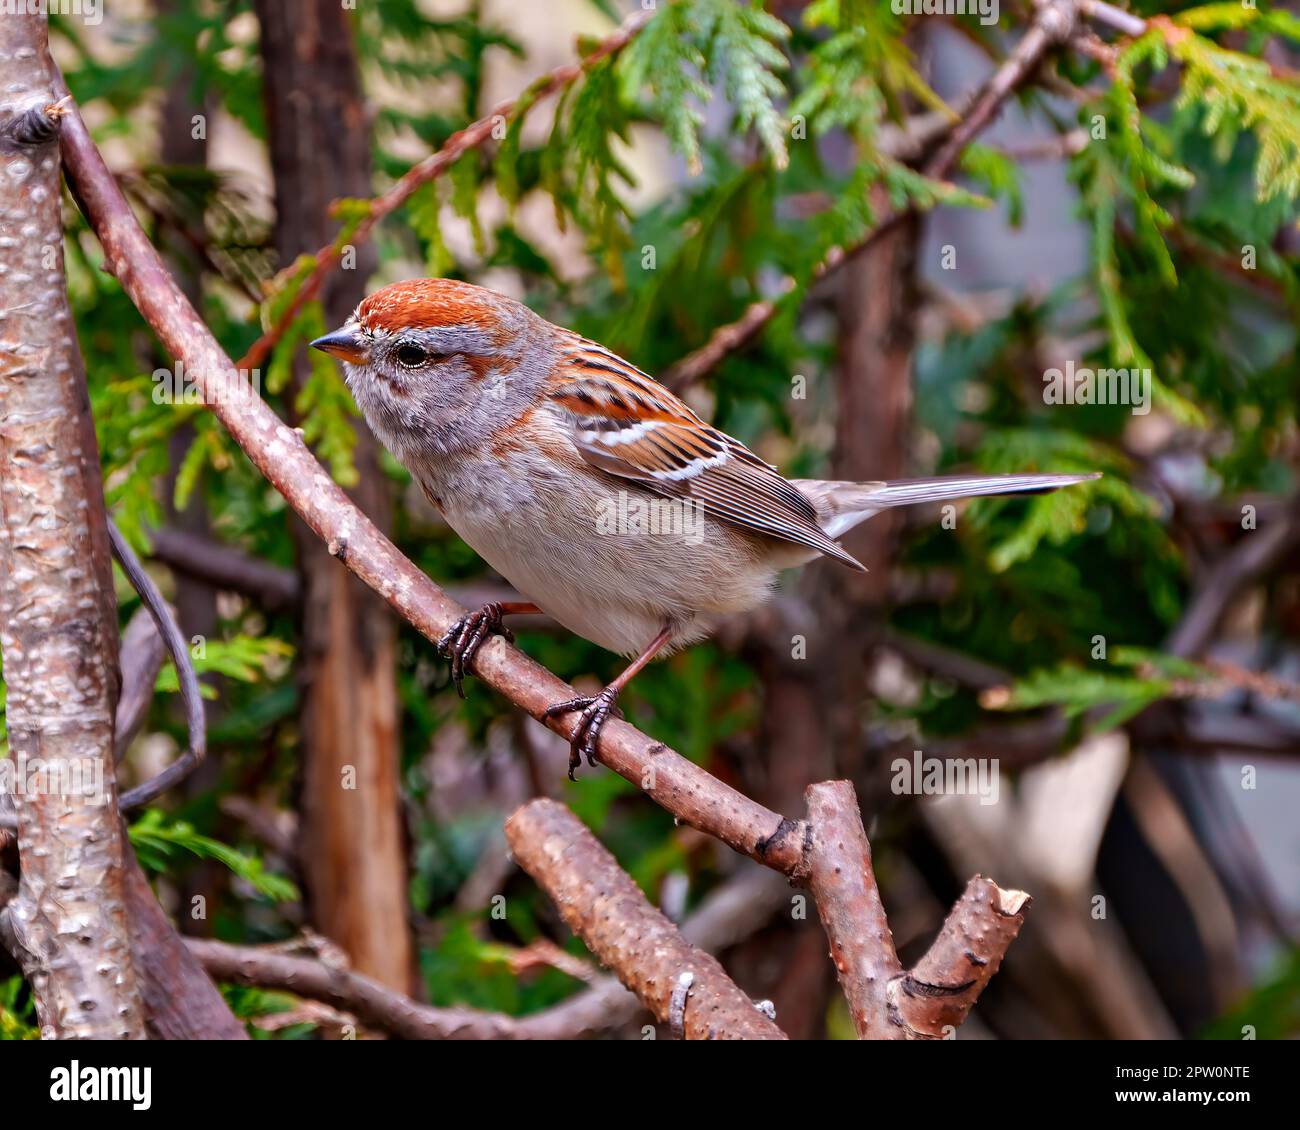 American Tree Sparrow close-up view perched on a cedar tree branch in its environment and habitat with a forest background. Sparrow Picture. Portrait. Stock Photo